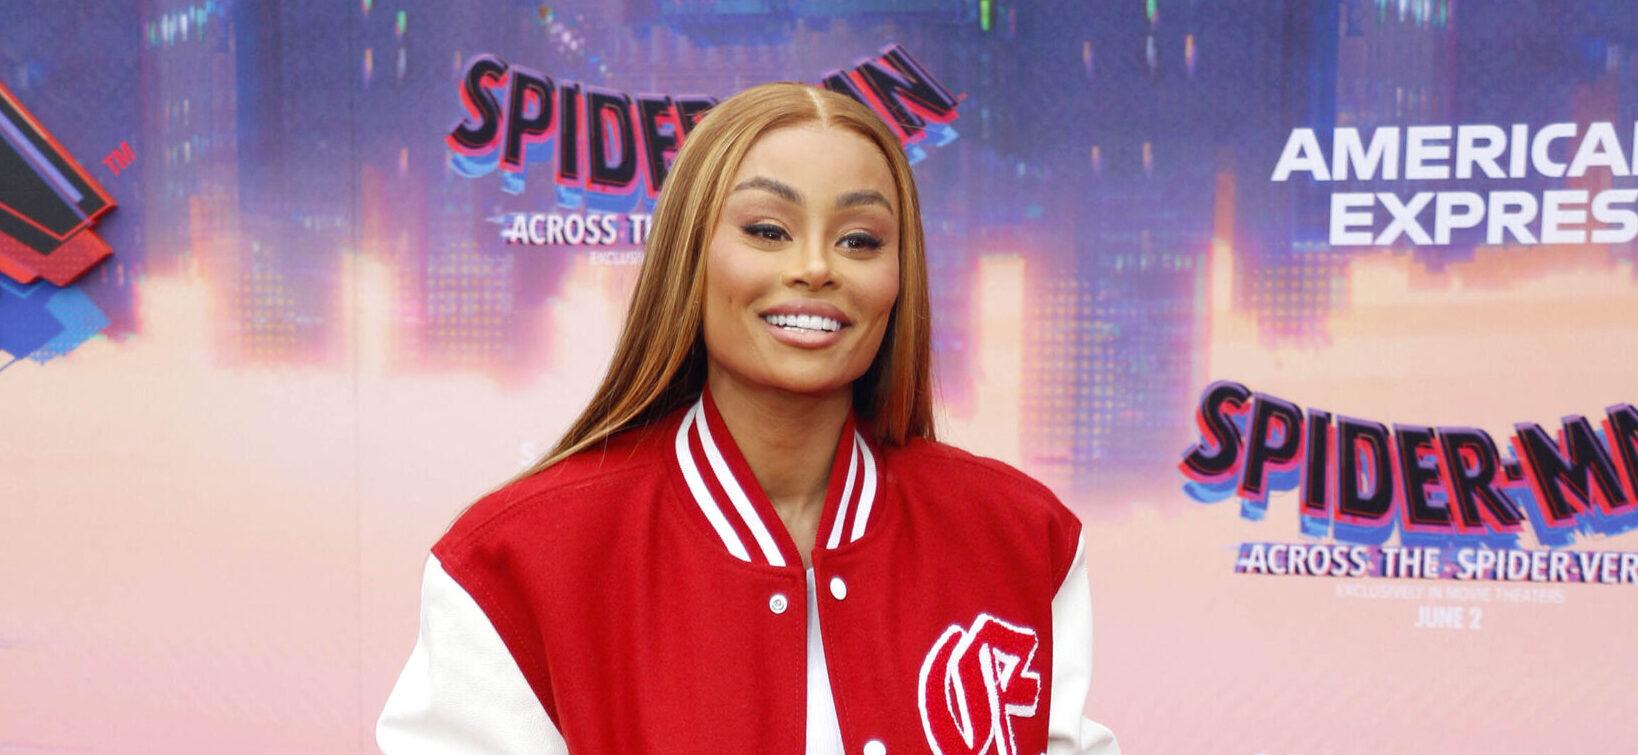 Blac Chyna Talks Decision To Reverse Cosmetic Procedures And Tattoos